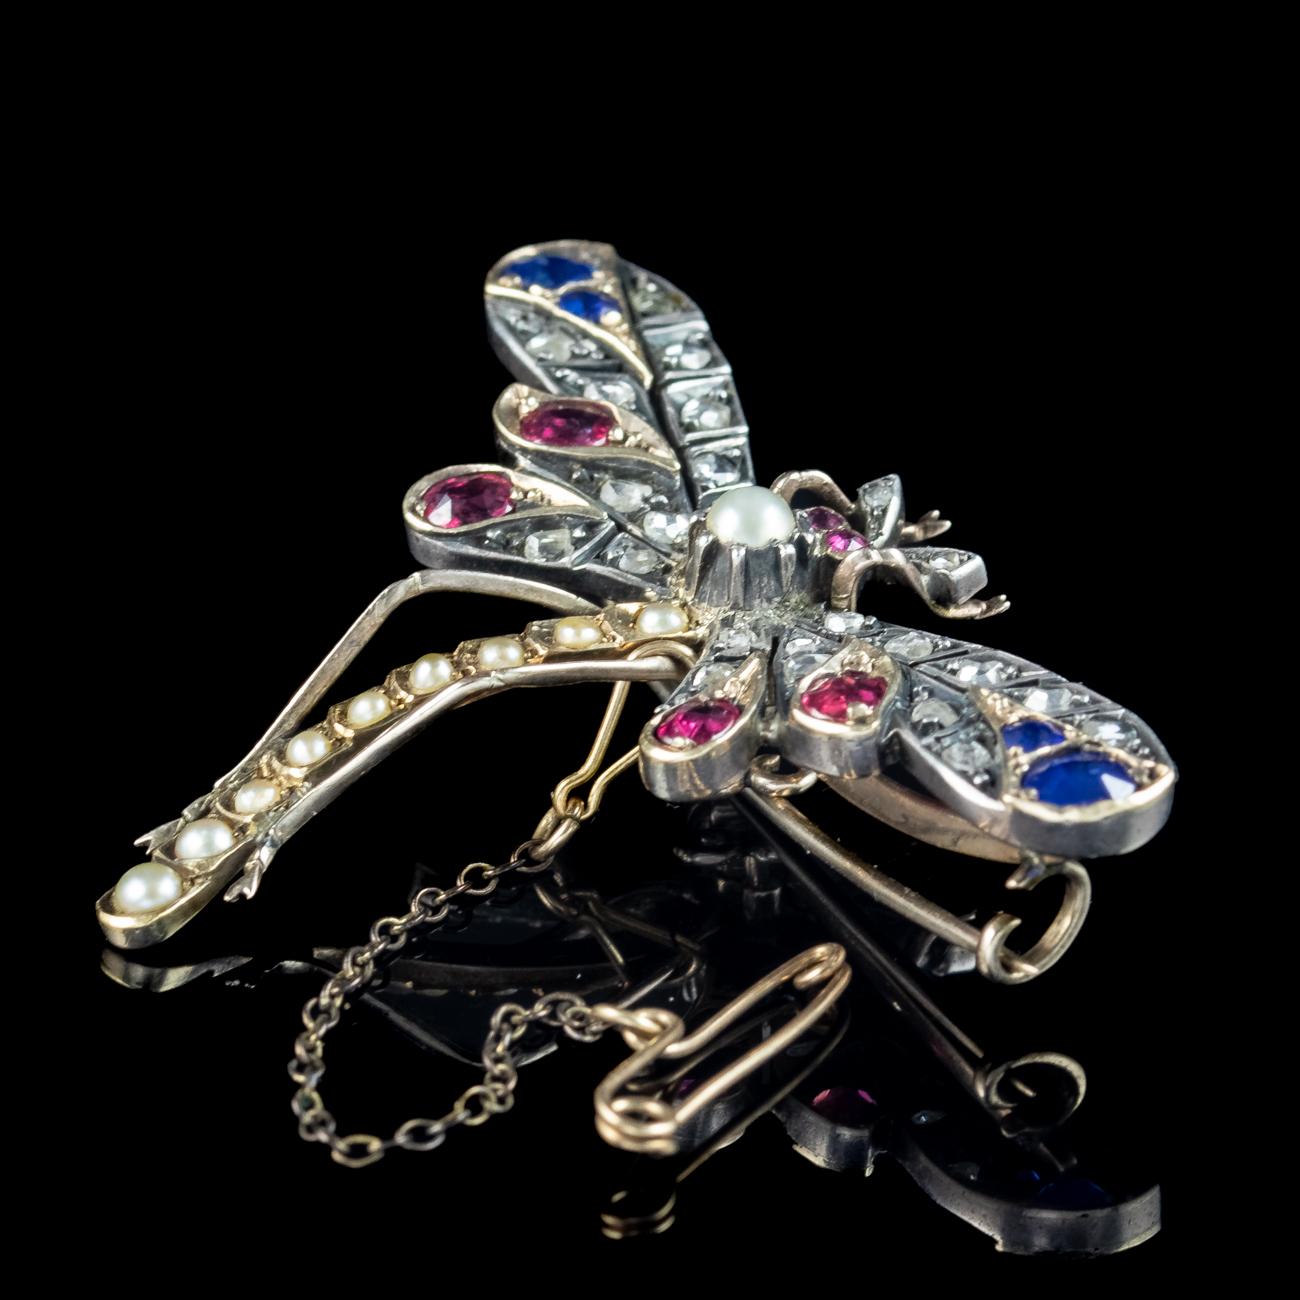 Antique Cushion Cut Antique Victorian Dragonfly Brooch Diamond Sapphire Ruby Pearl  For Sale